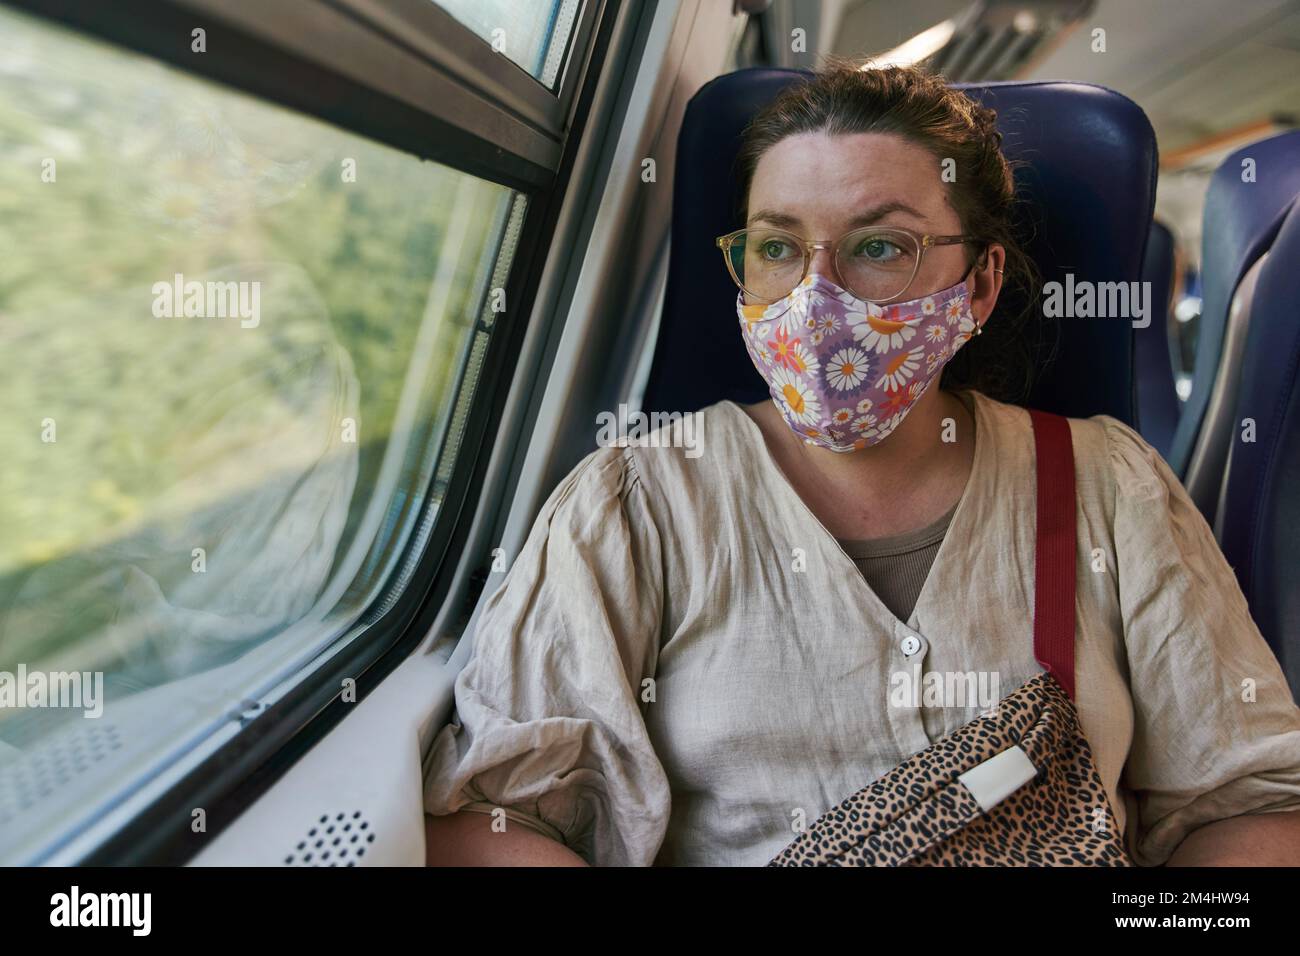 A girl in glasses and a medical mask riding a train and looking out the window Stock Photo